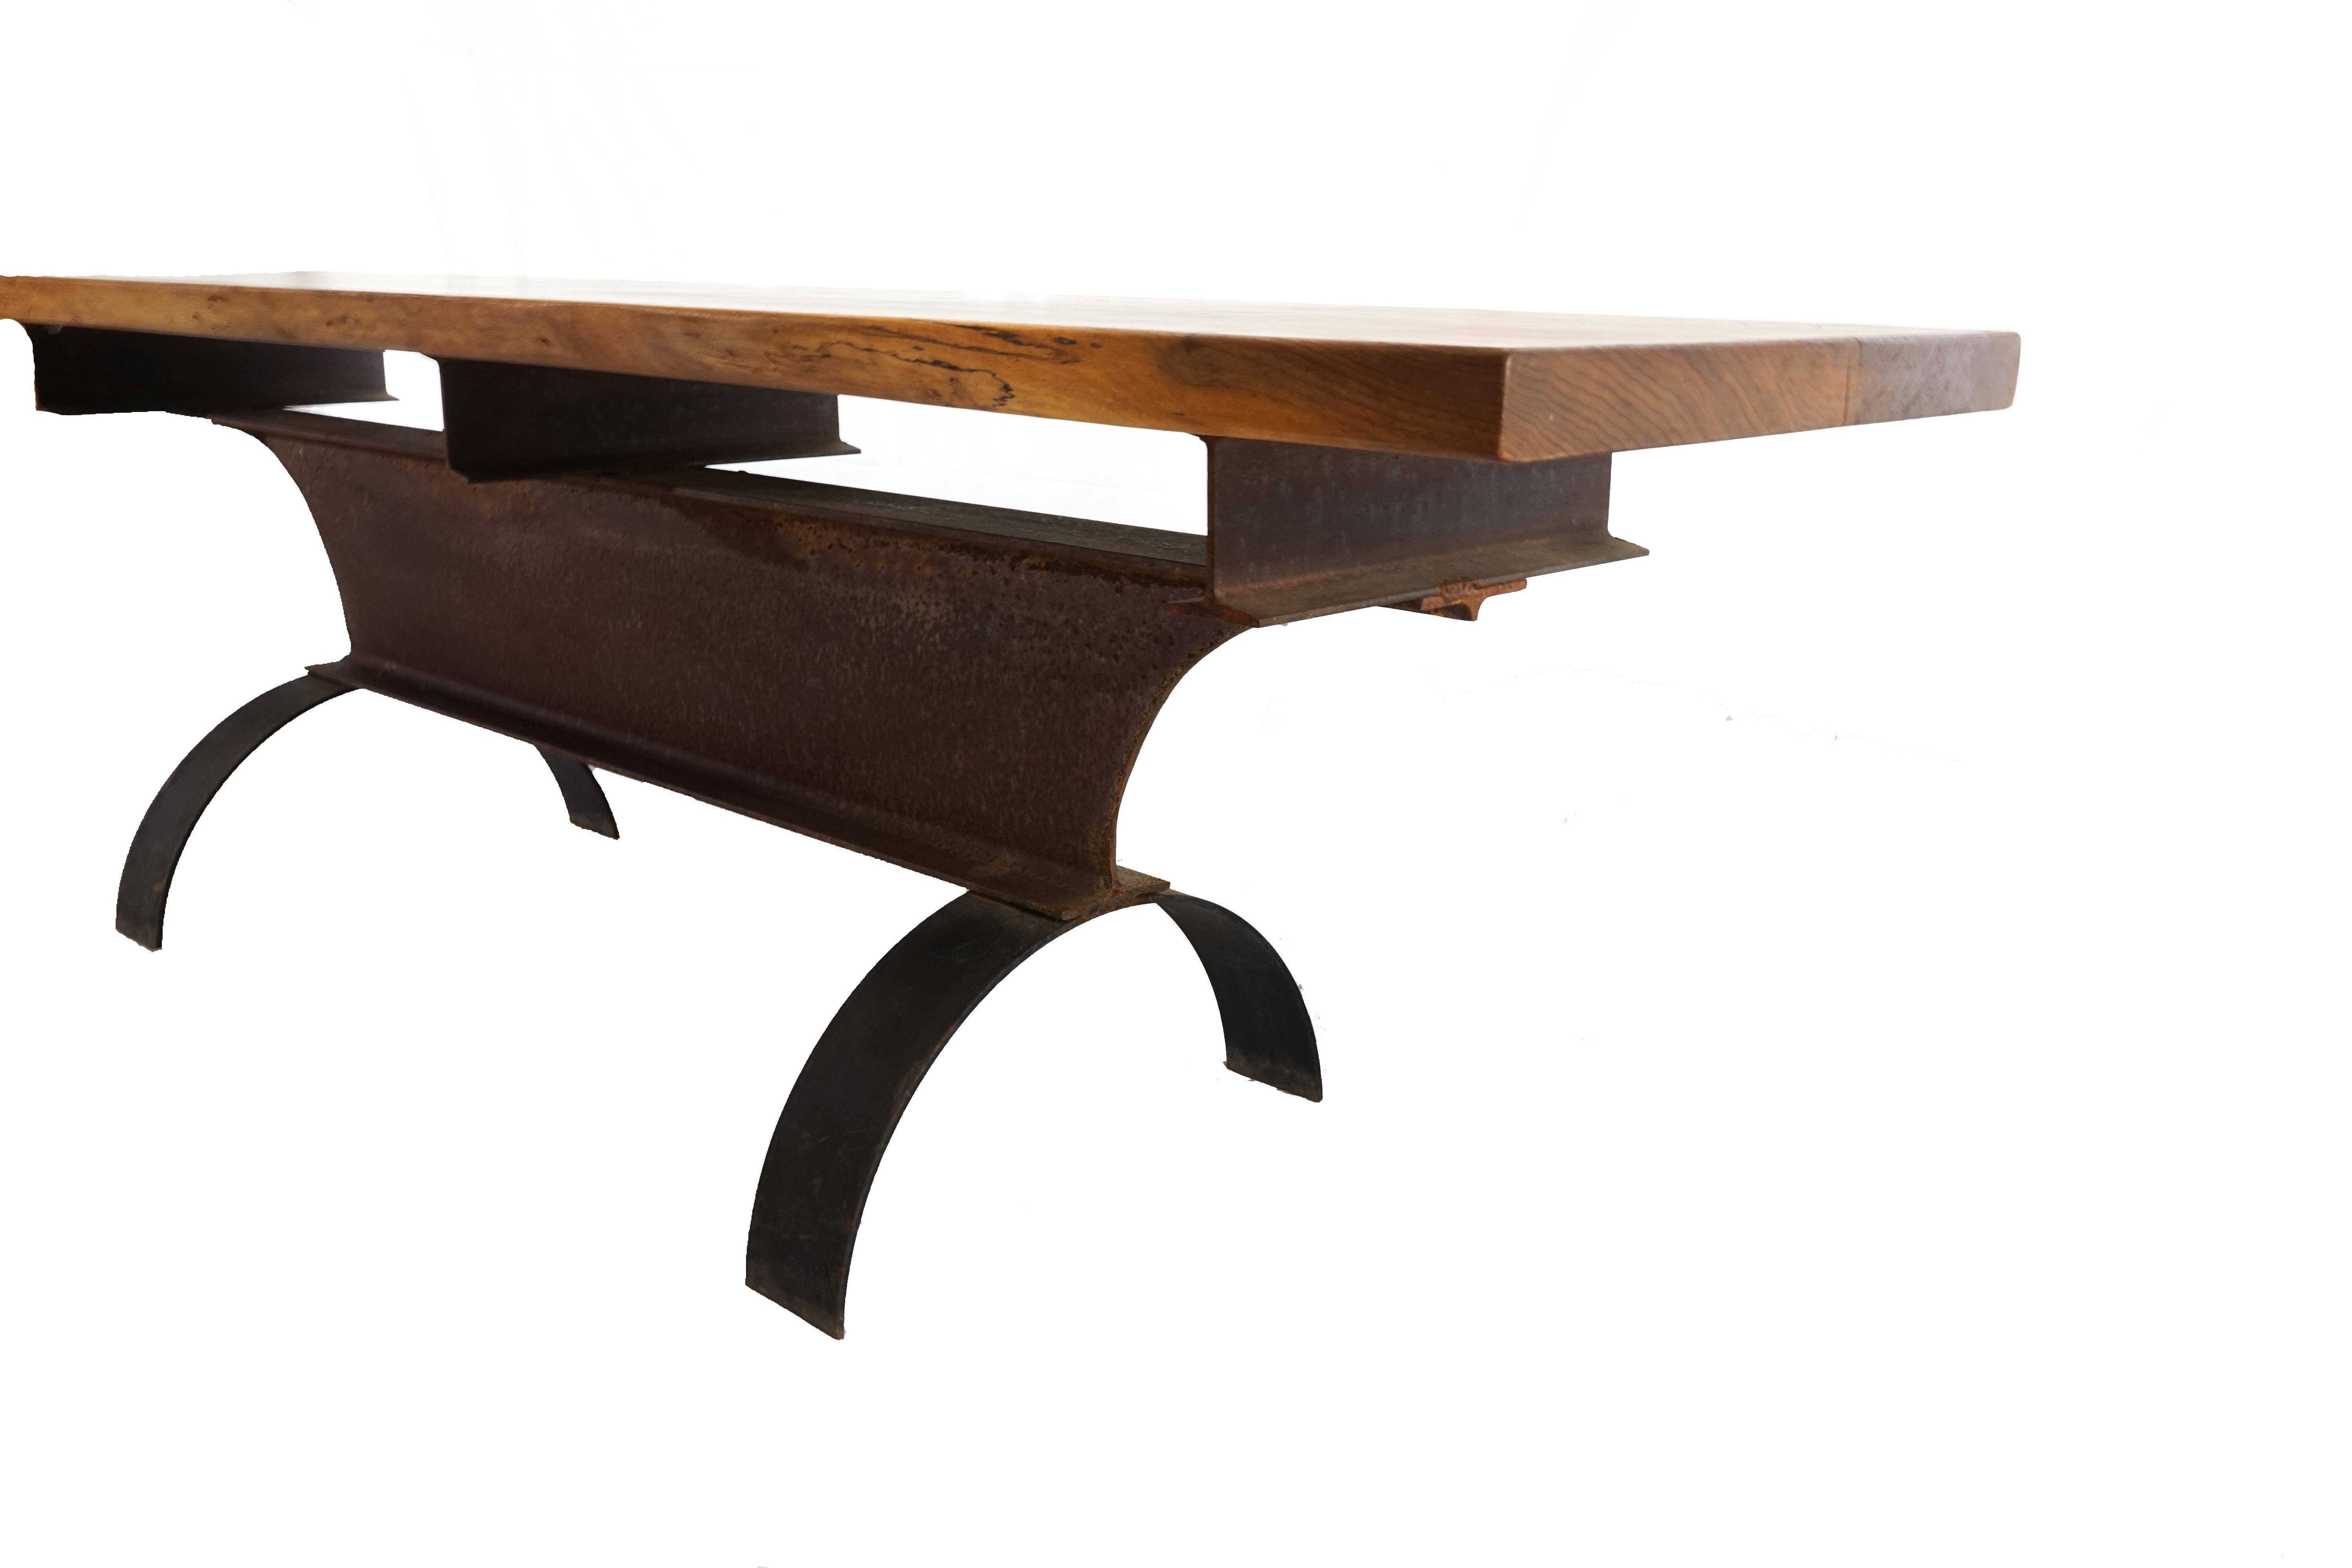 -) Walnut and steel console/coffee table.
-) Measures: L 71” x W 18.25